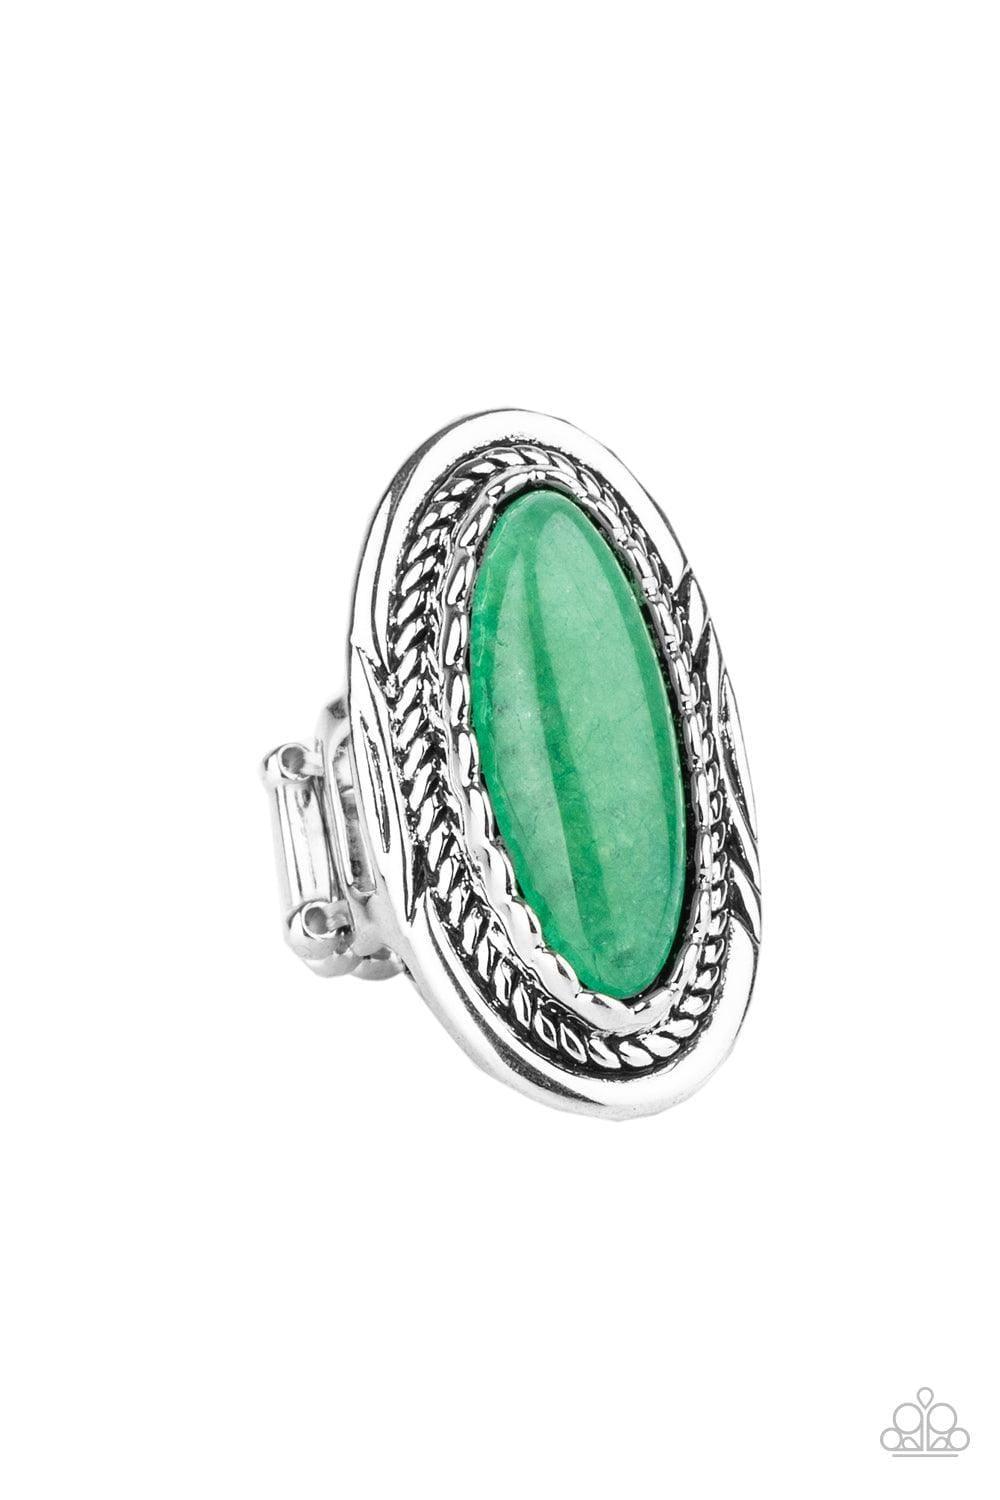 Paparazzi Accessories - Primal Instincts - Green Ring - Bling by JessieK